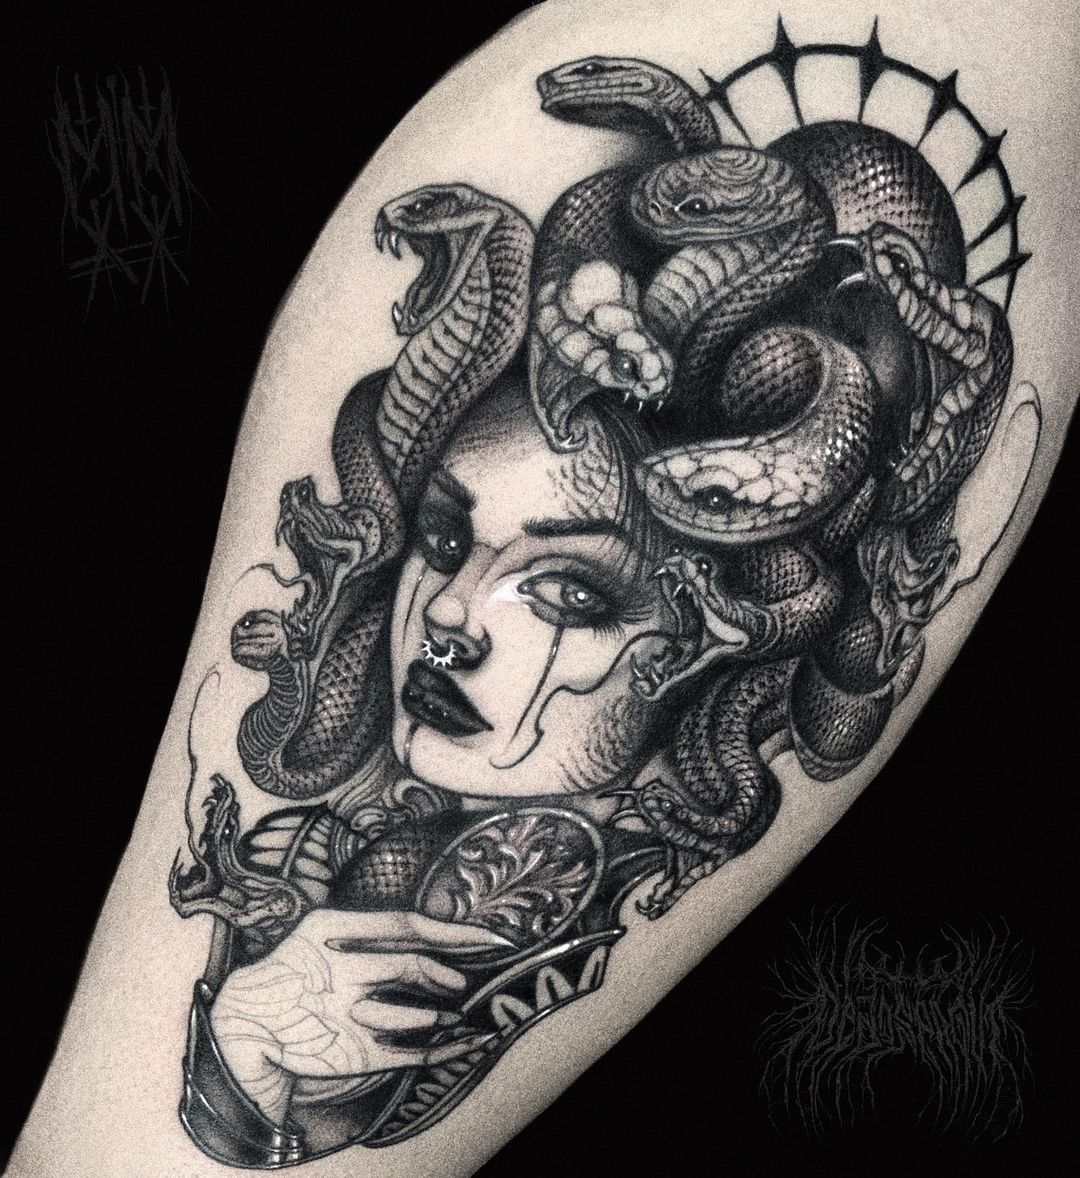 Tattoo artist Deadsprout | Norway | iNKPPL